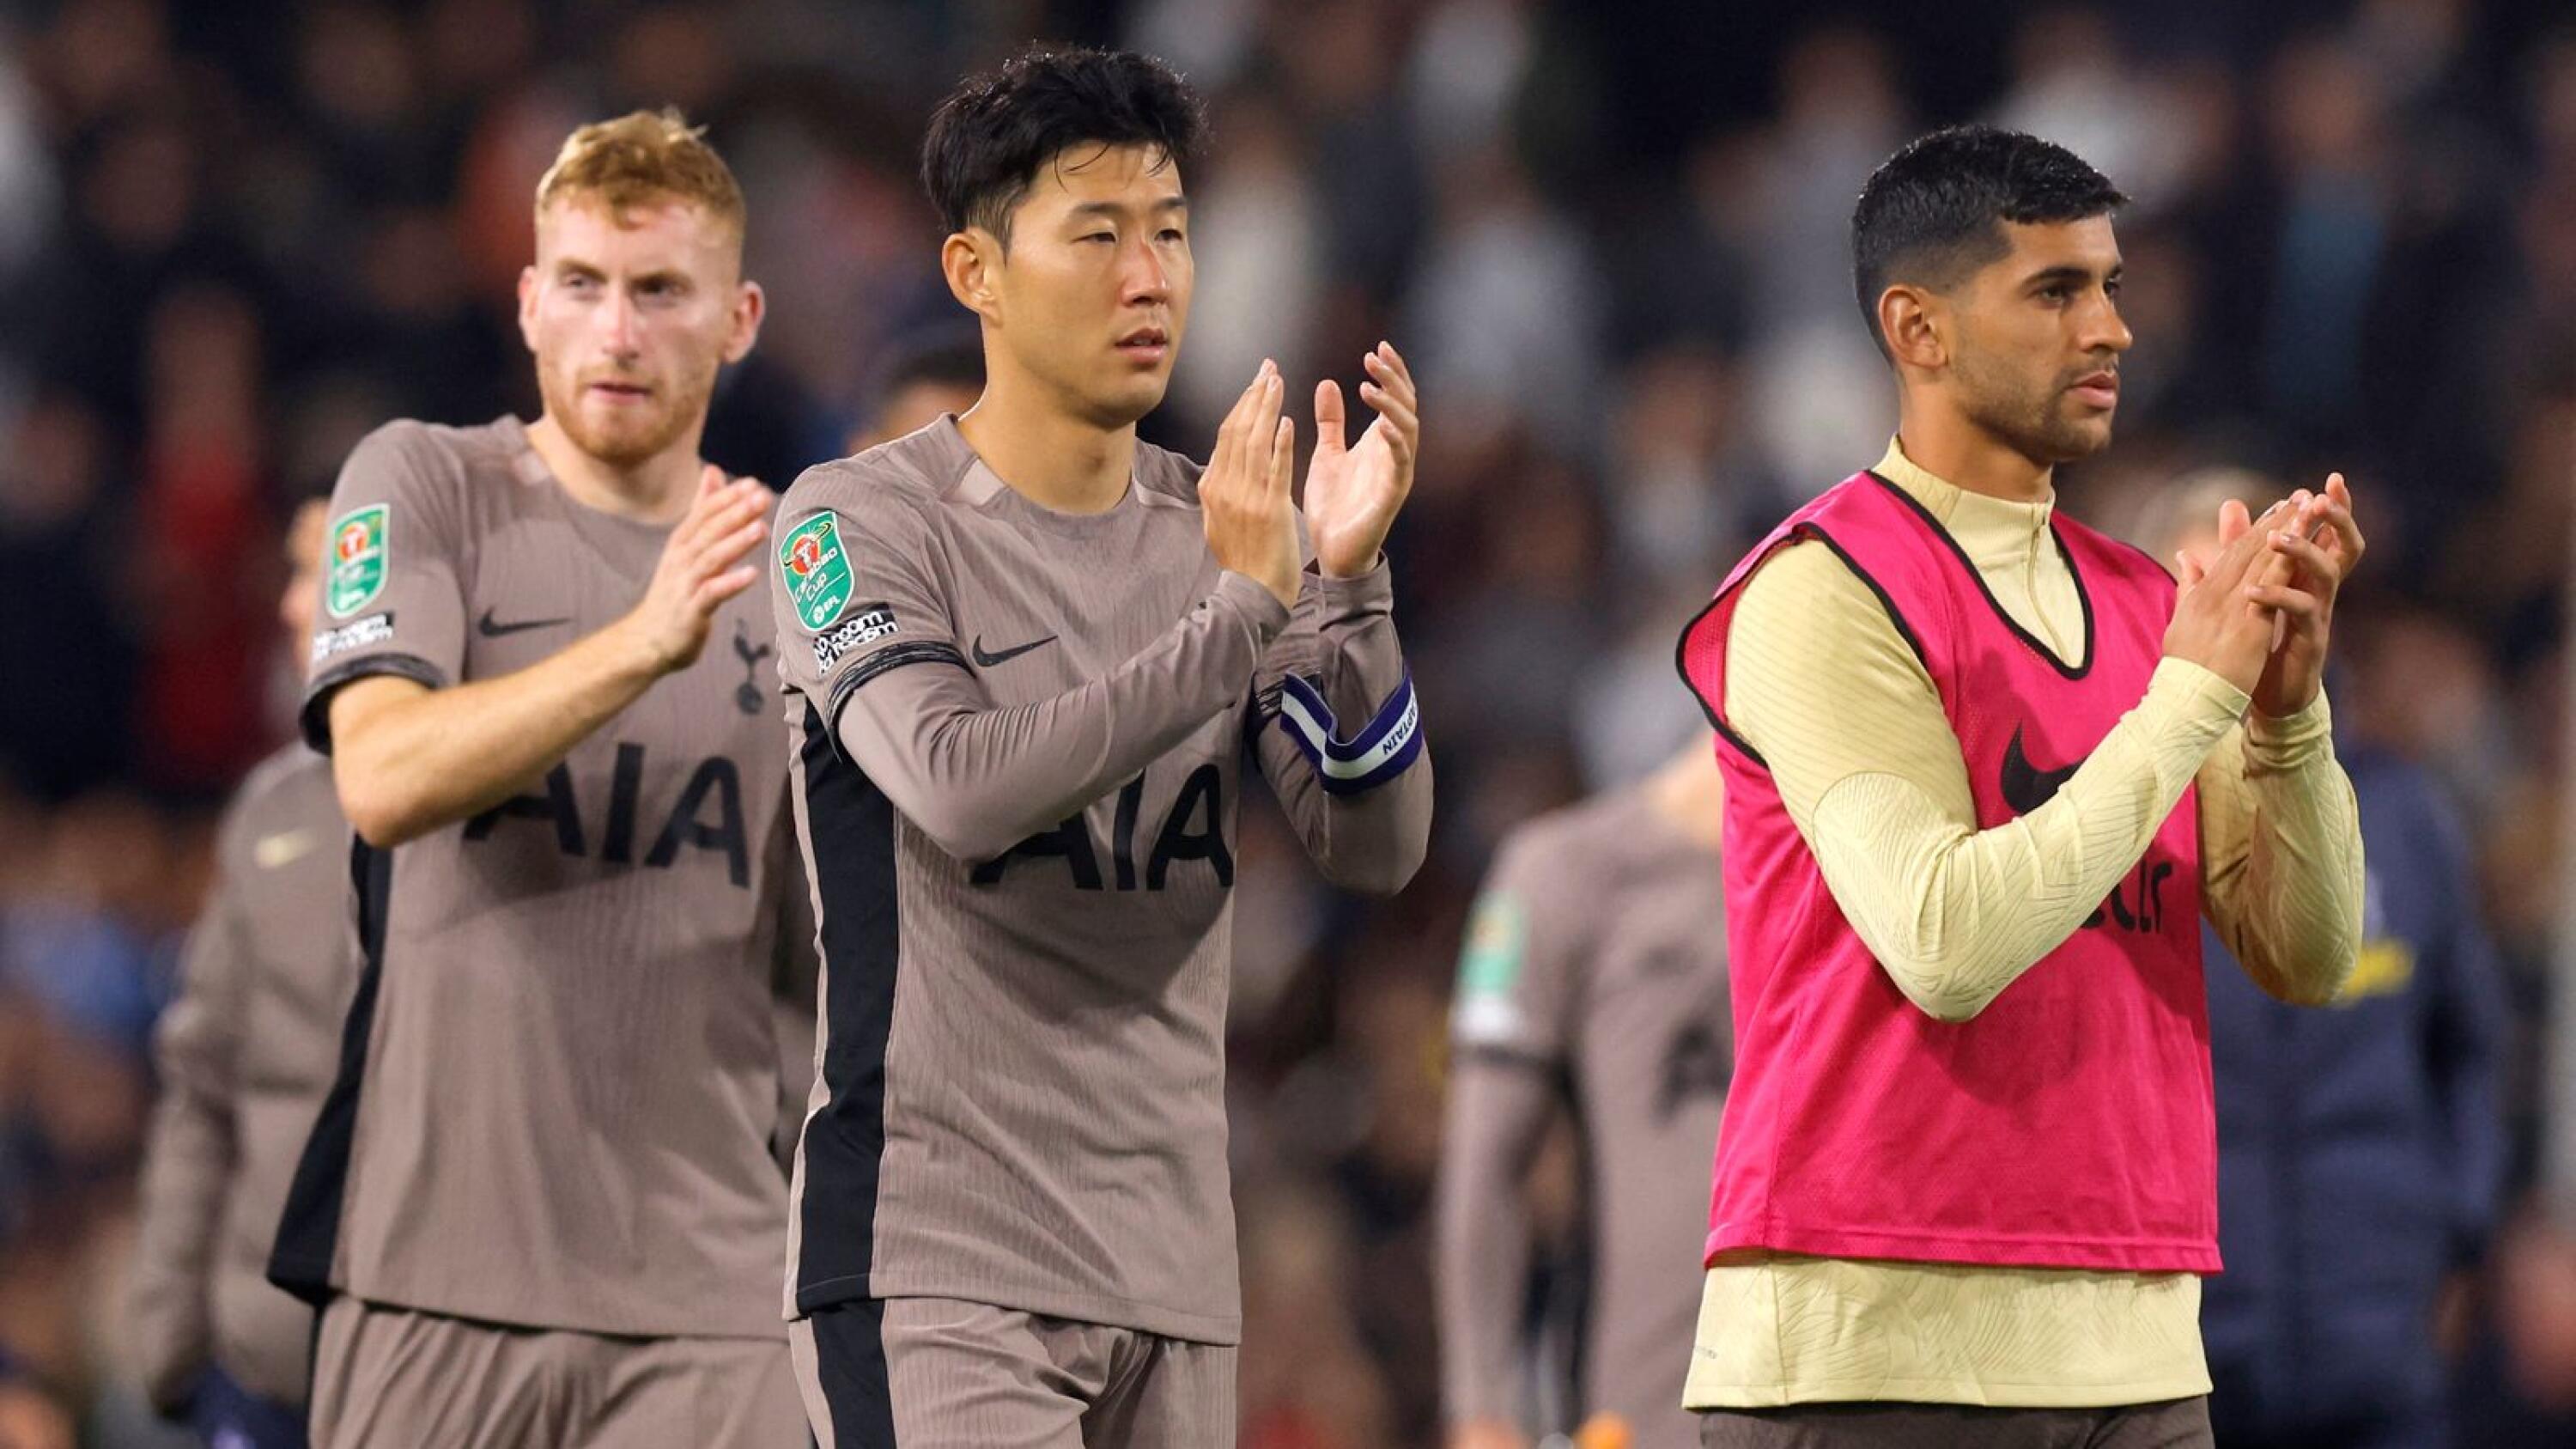 Tottenham Hotspur's Son Heung-min claps after their exit from the League Cup